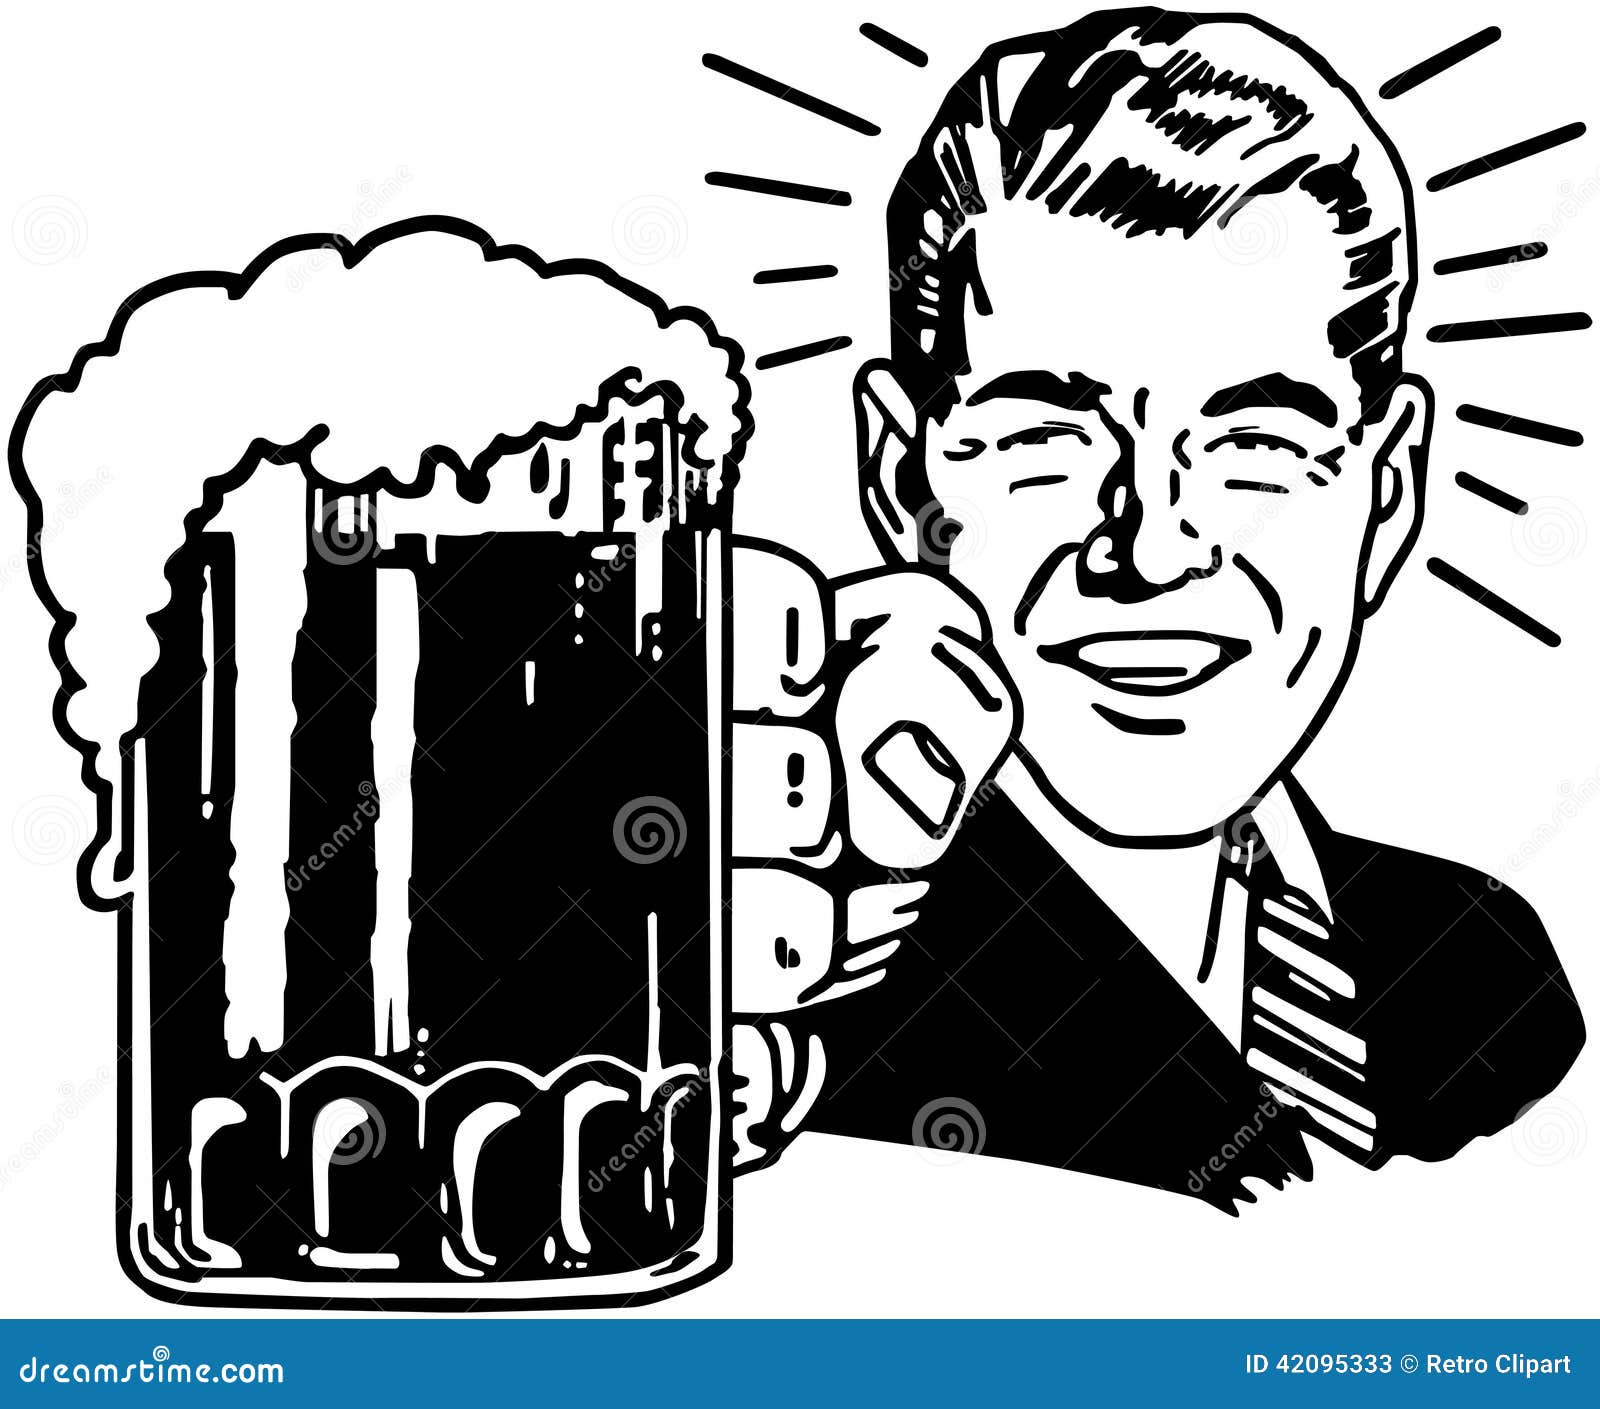 clipart man drinking beer - photo #19